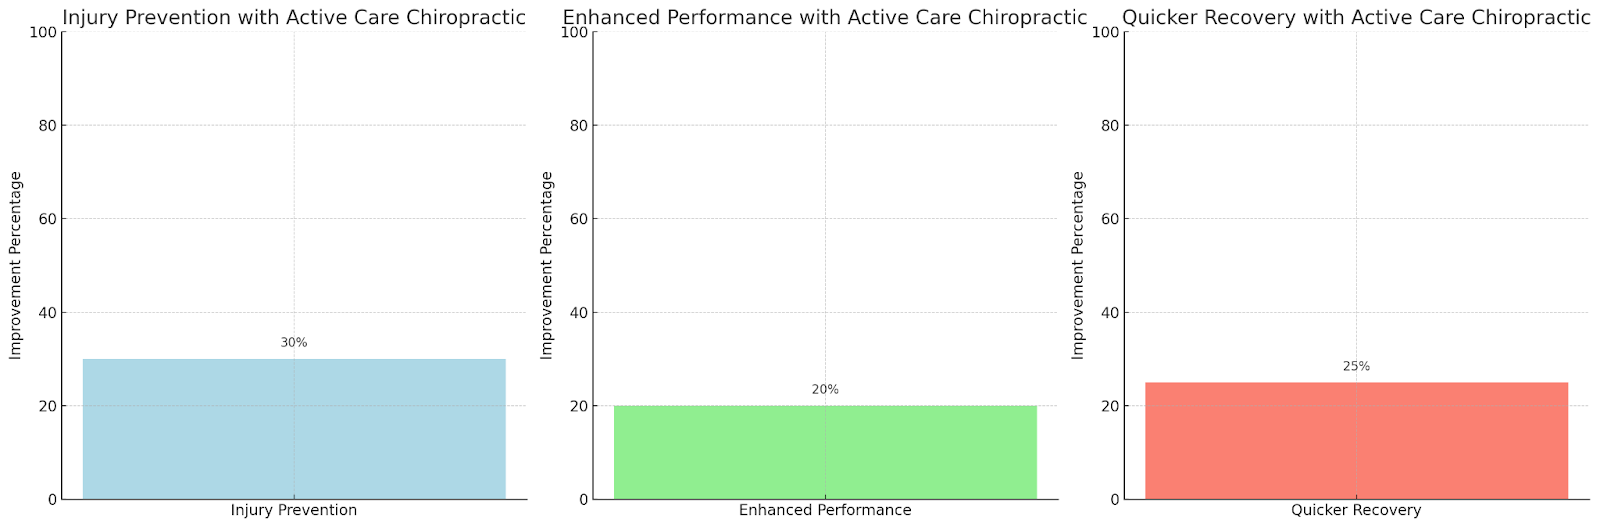 Hypothetical Scenarios Based on Chiropractic Care Principles for Active Lifestyles